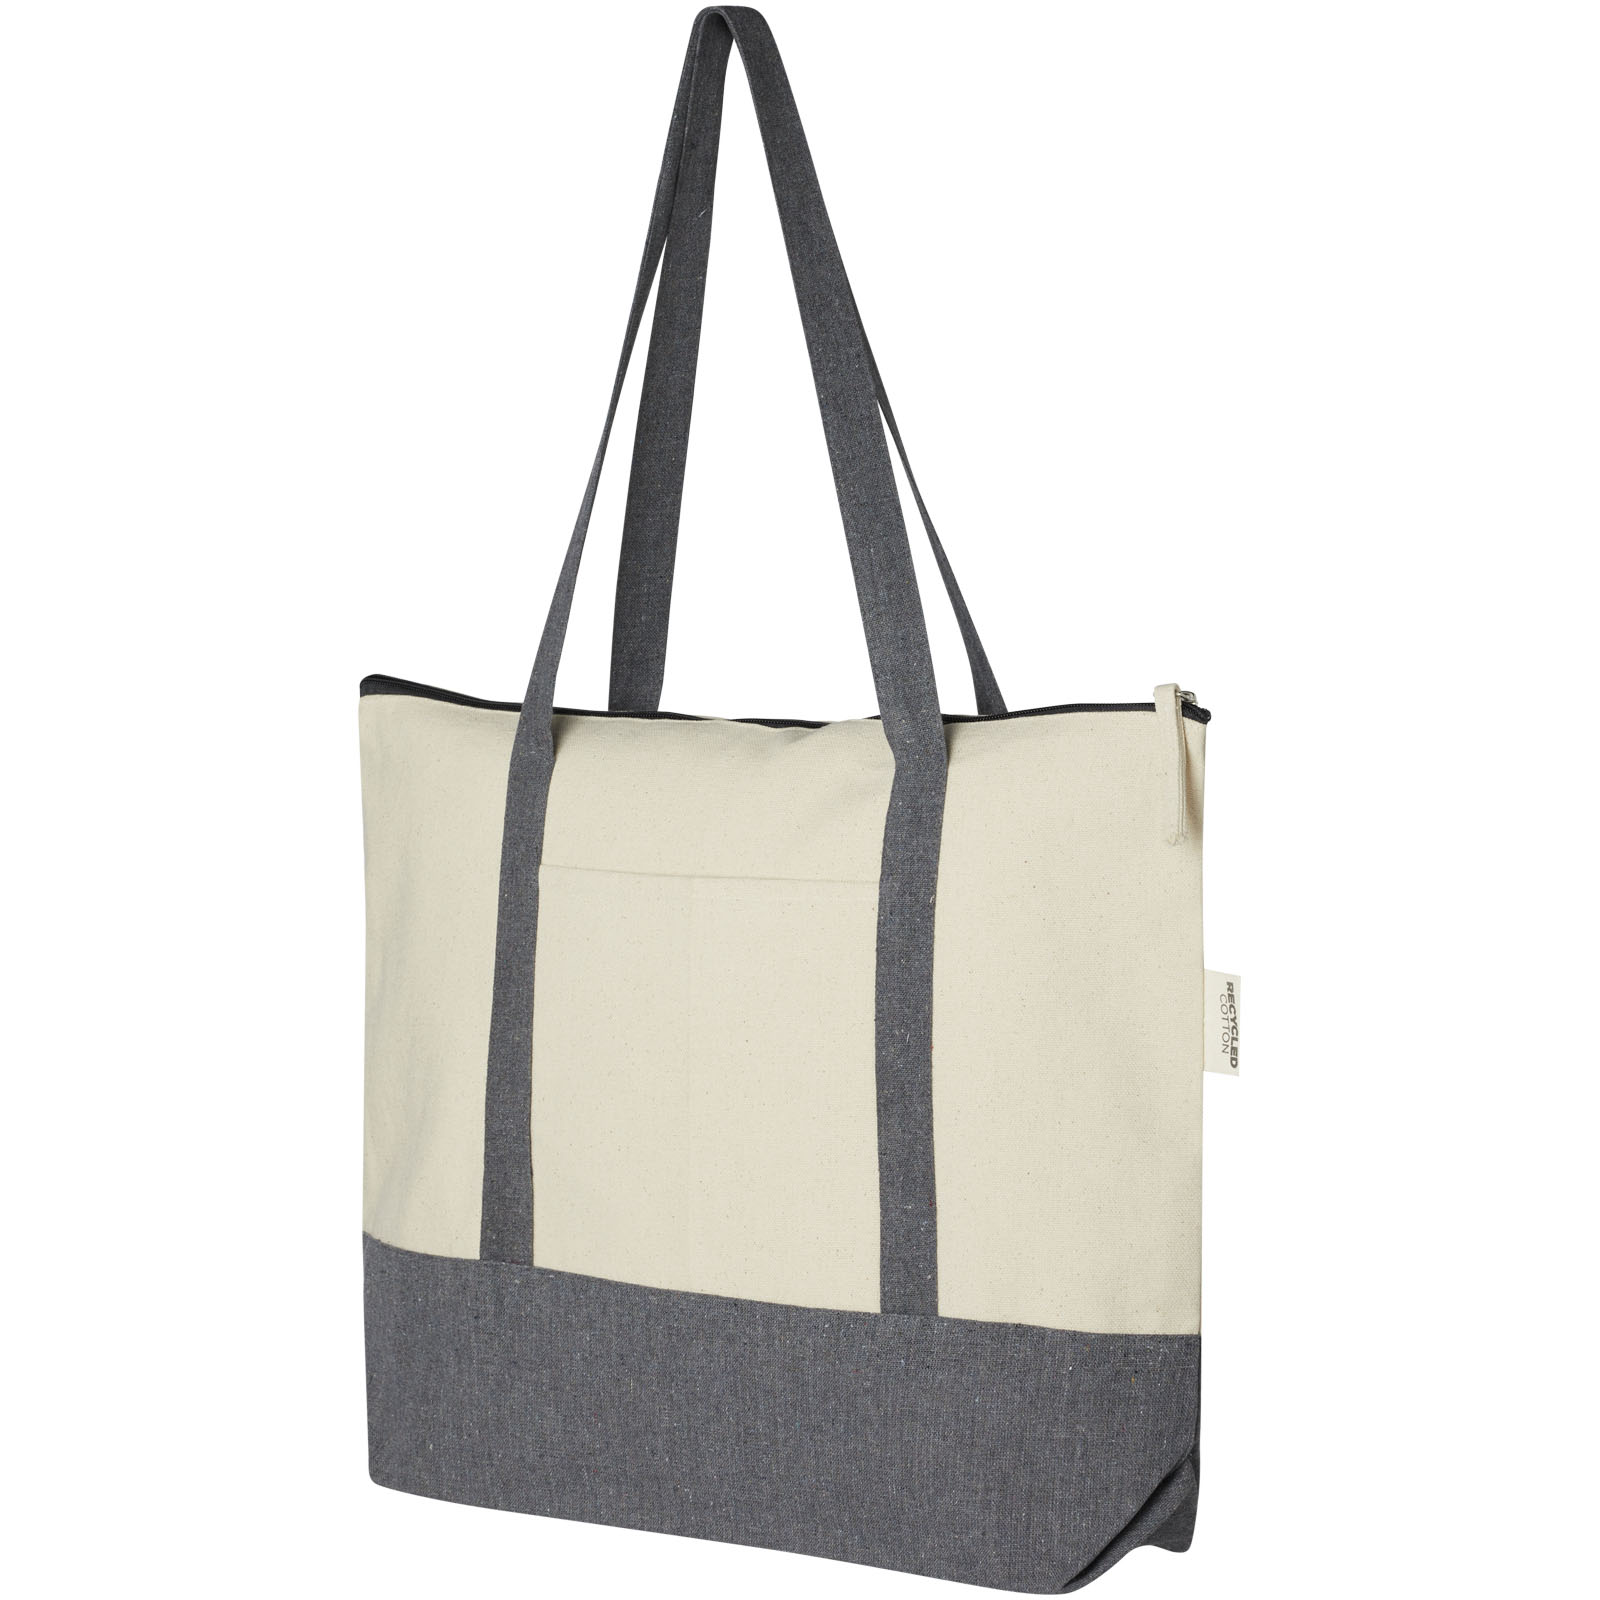 Bags - Repose 320 g/m² recycled cotton zippered tote bag 10L